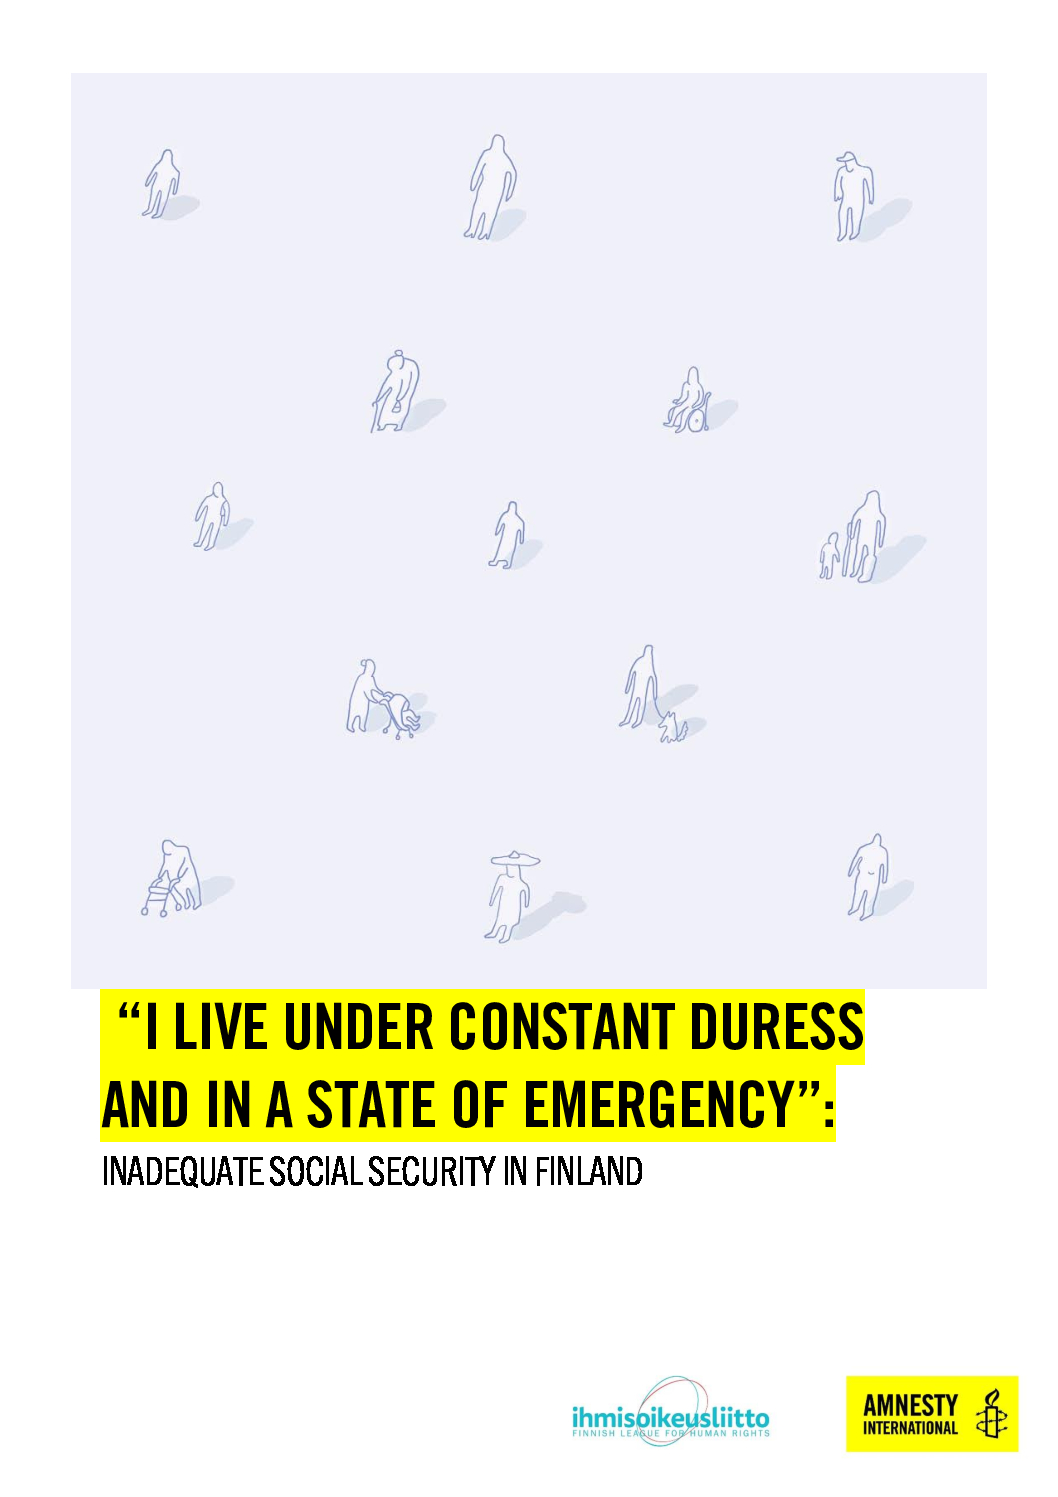 Finland “I Live under constant duress and in a state of emergency” Inadequate social security in Finland